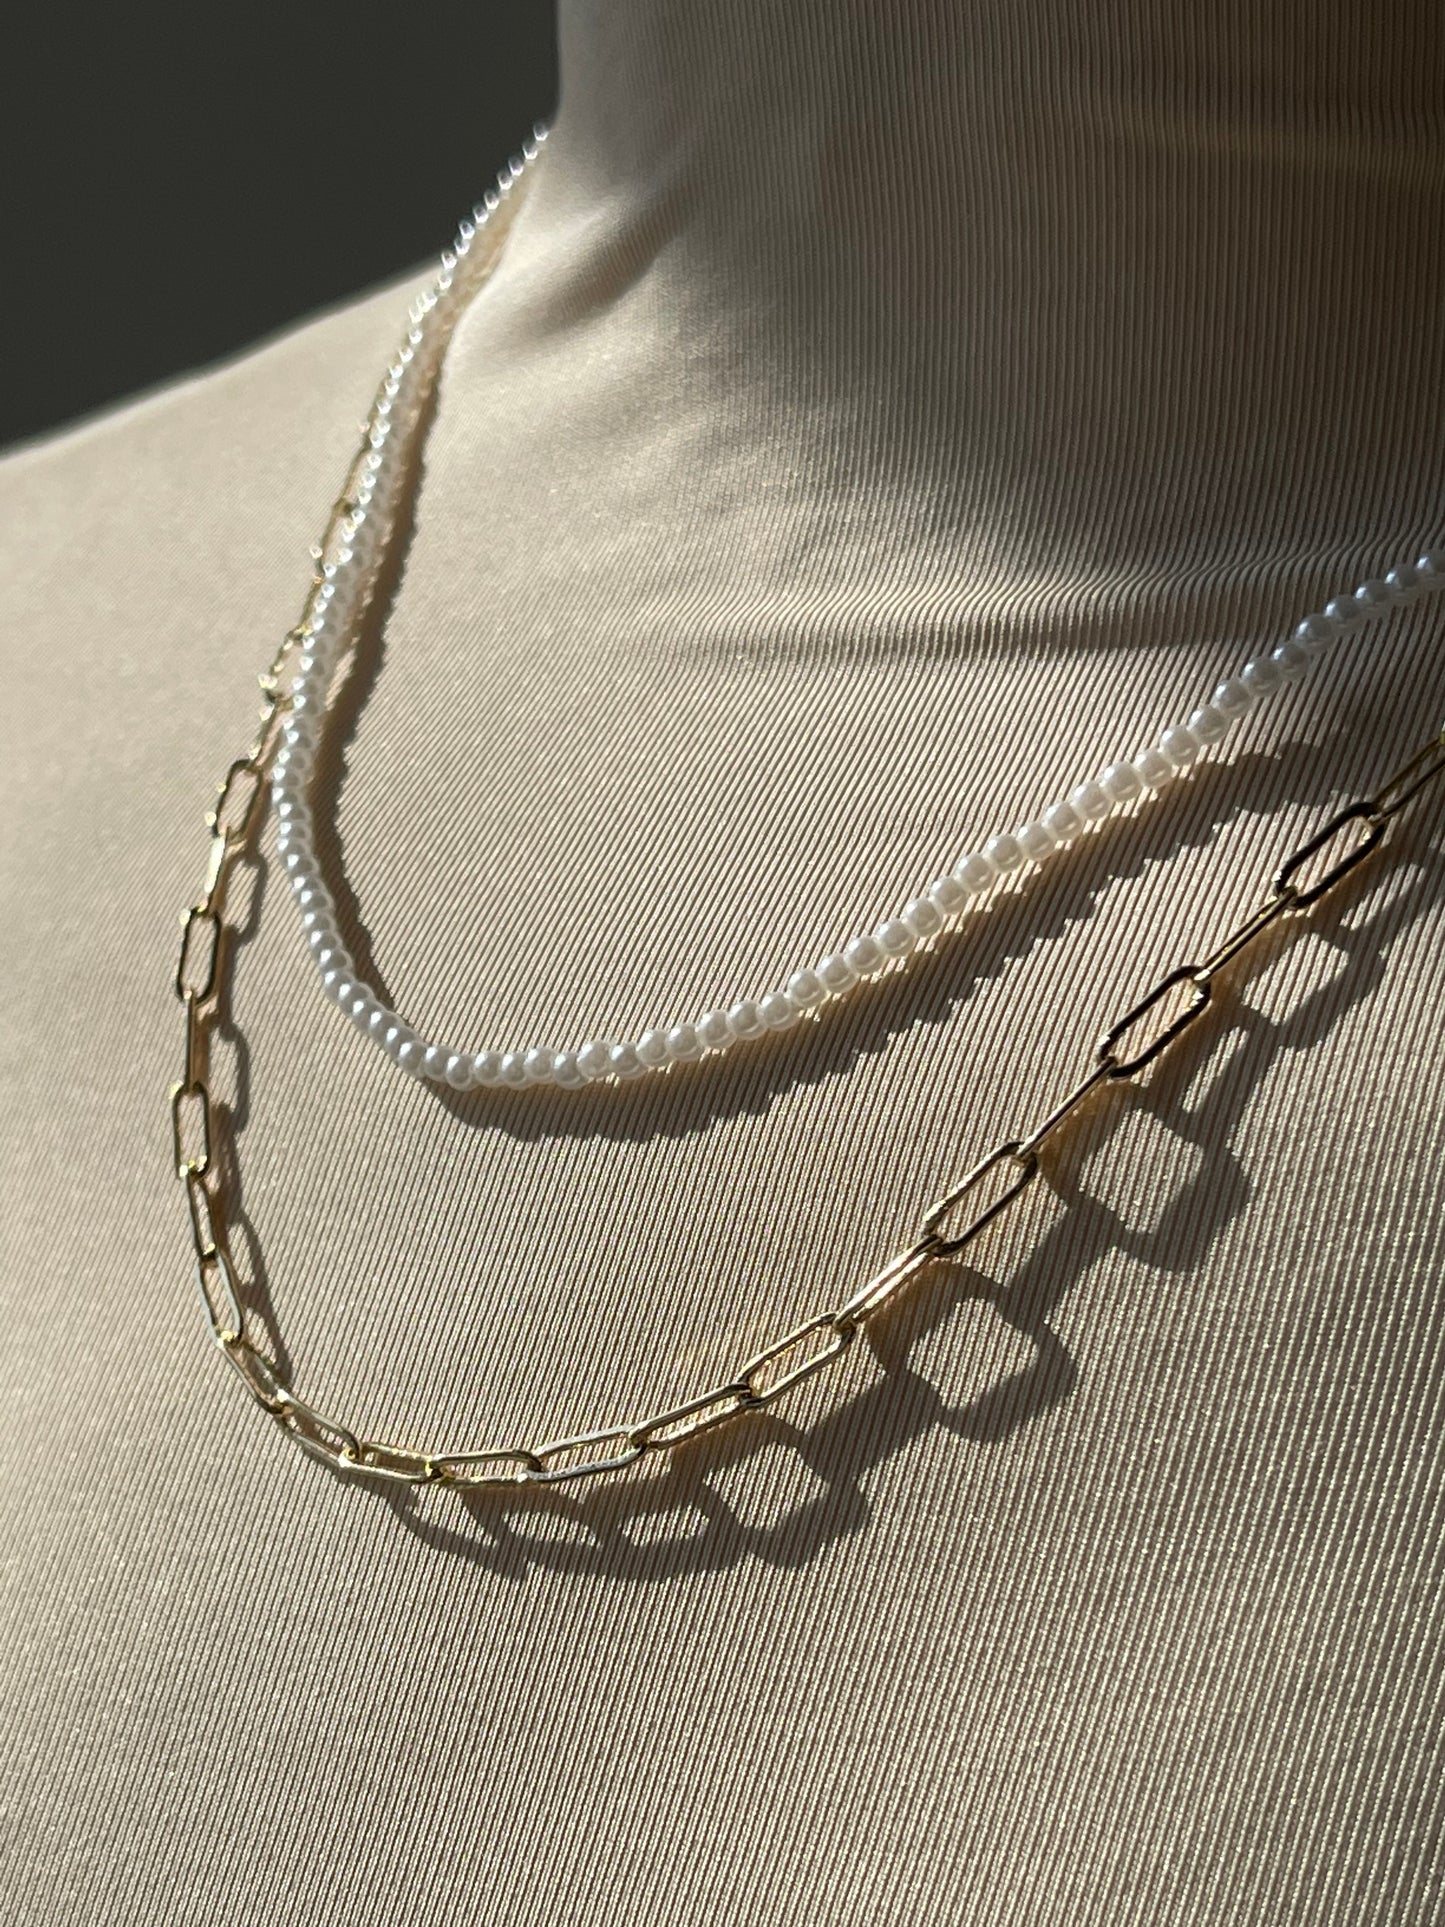 Holly Pearl Layered Link Chain Necklace In Gold